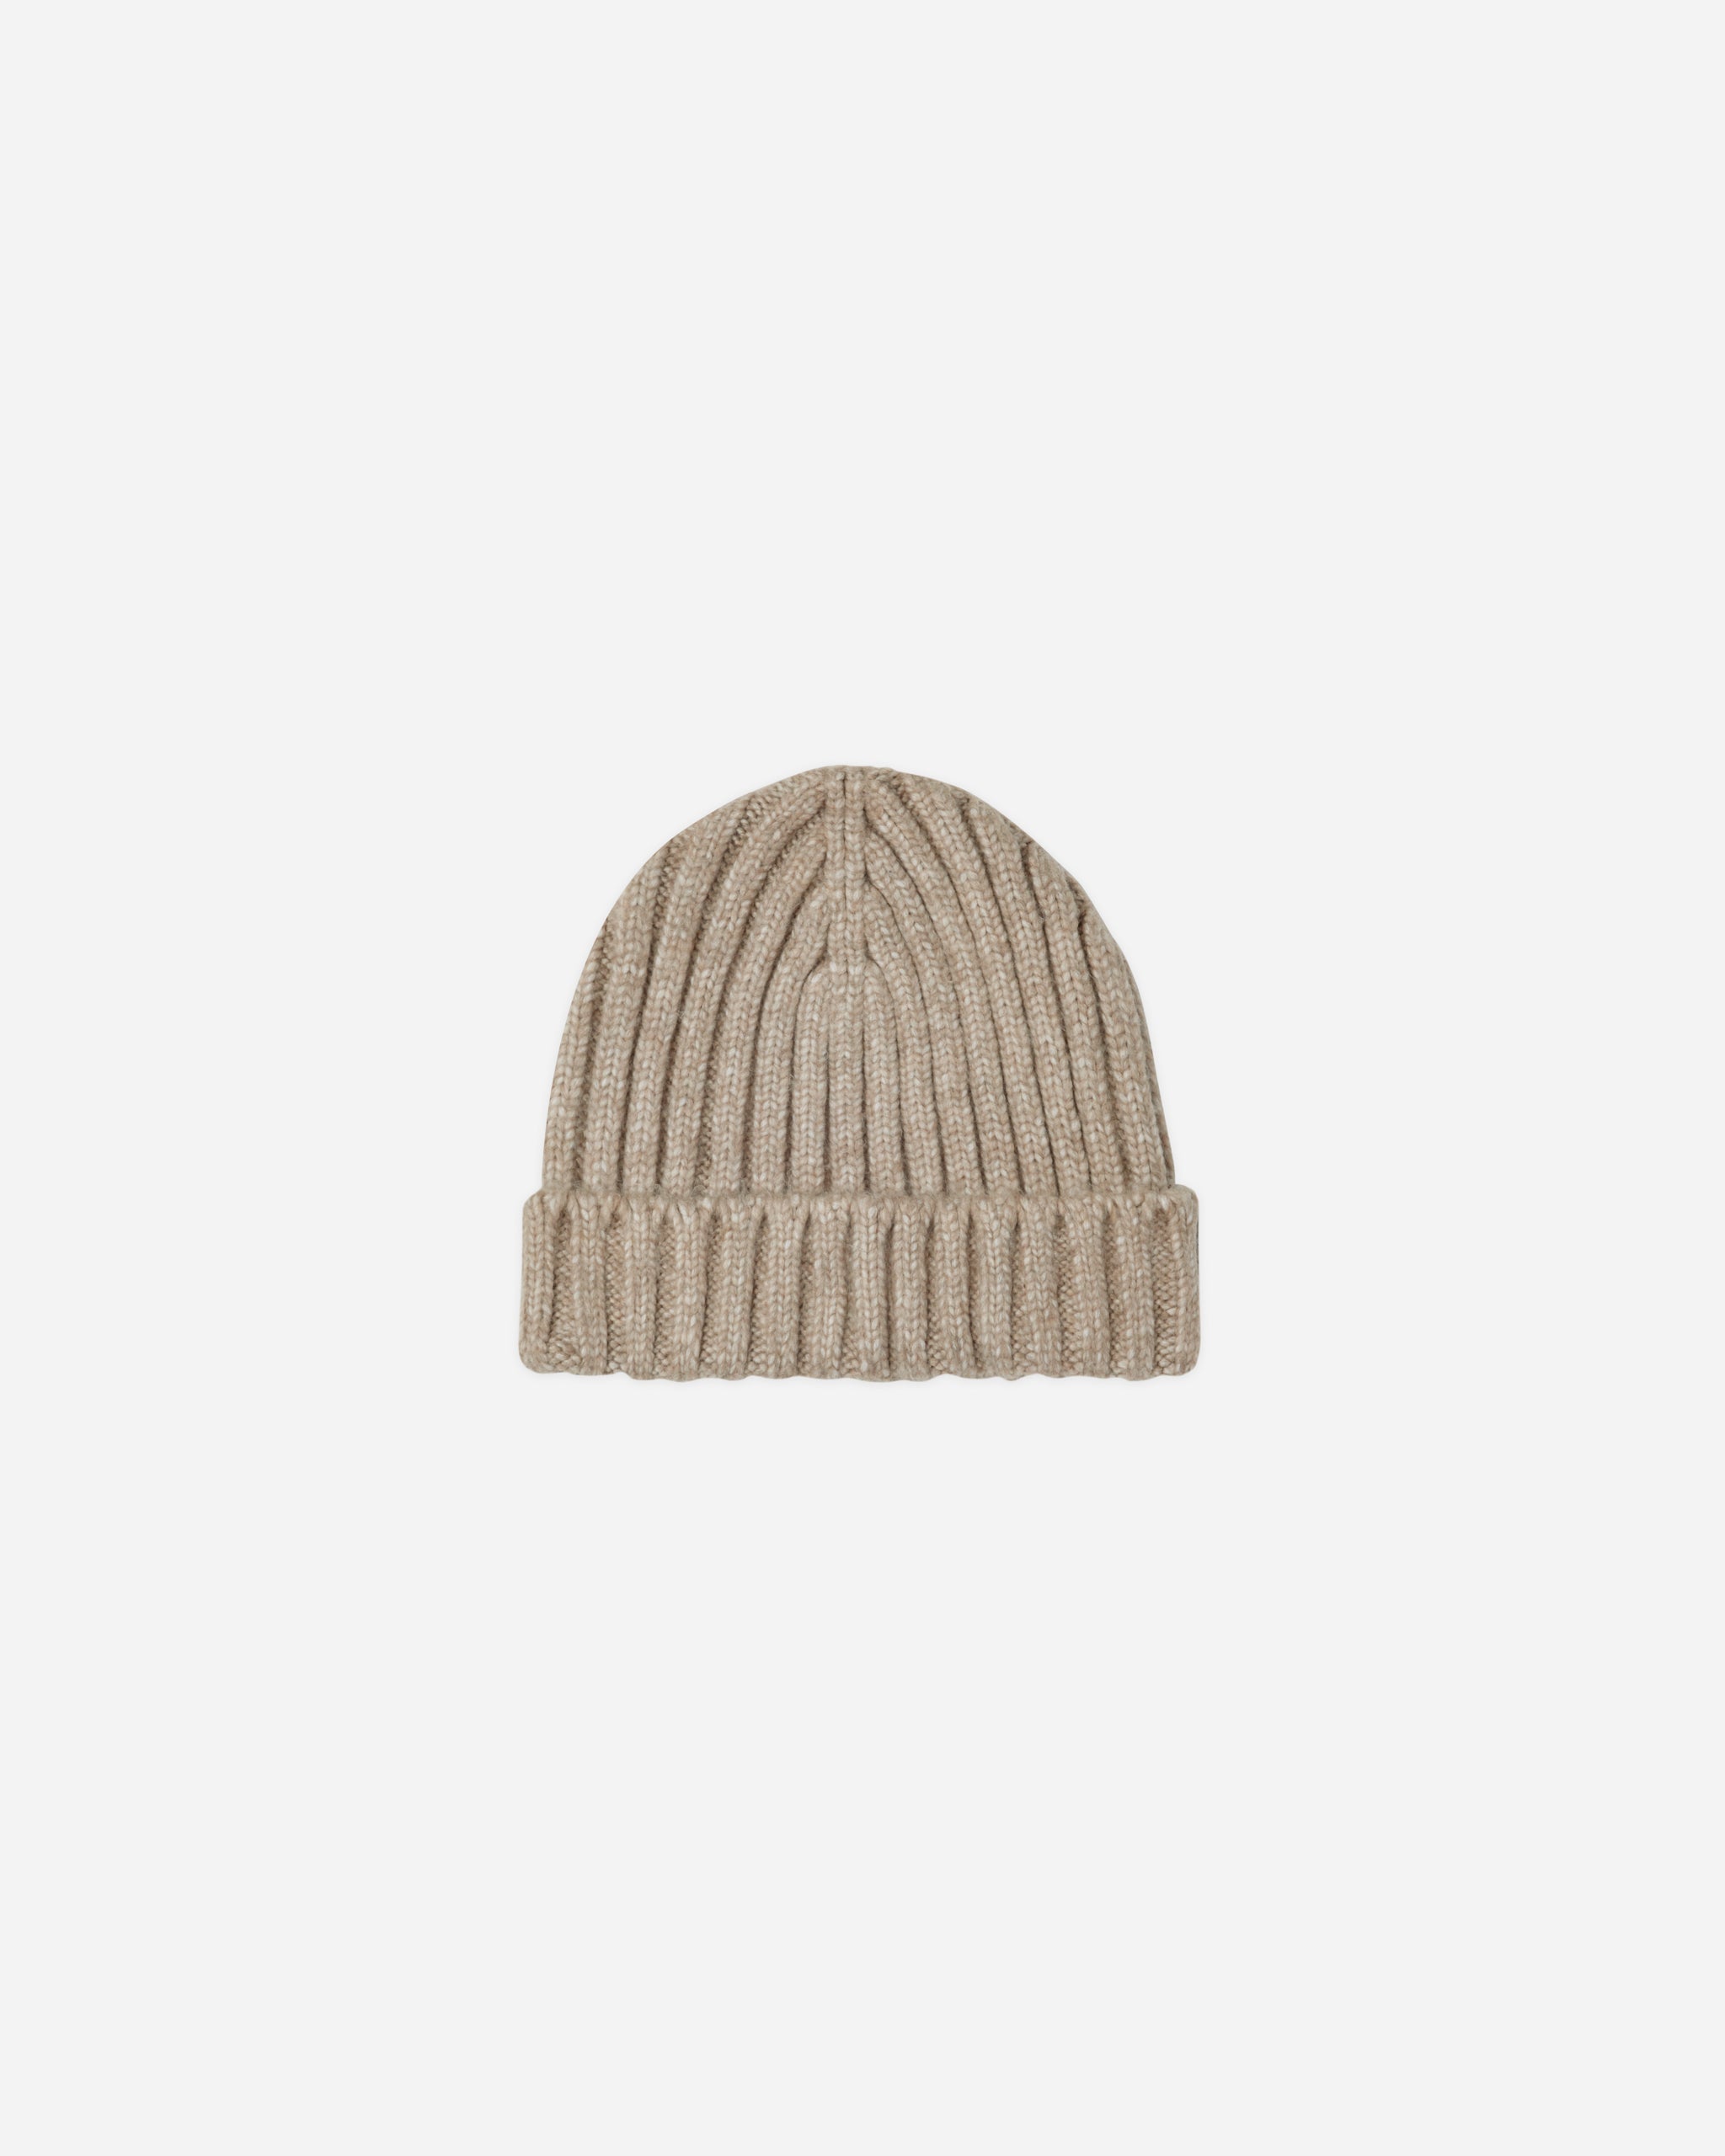 Beanie | Sand - Rylee + Cru | Kids Clothes | Trendy Baby Clothes | Modern Infant Outfits |